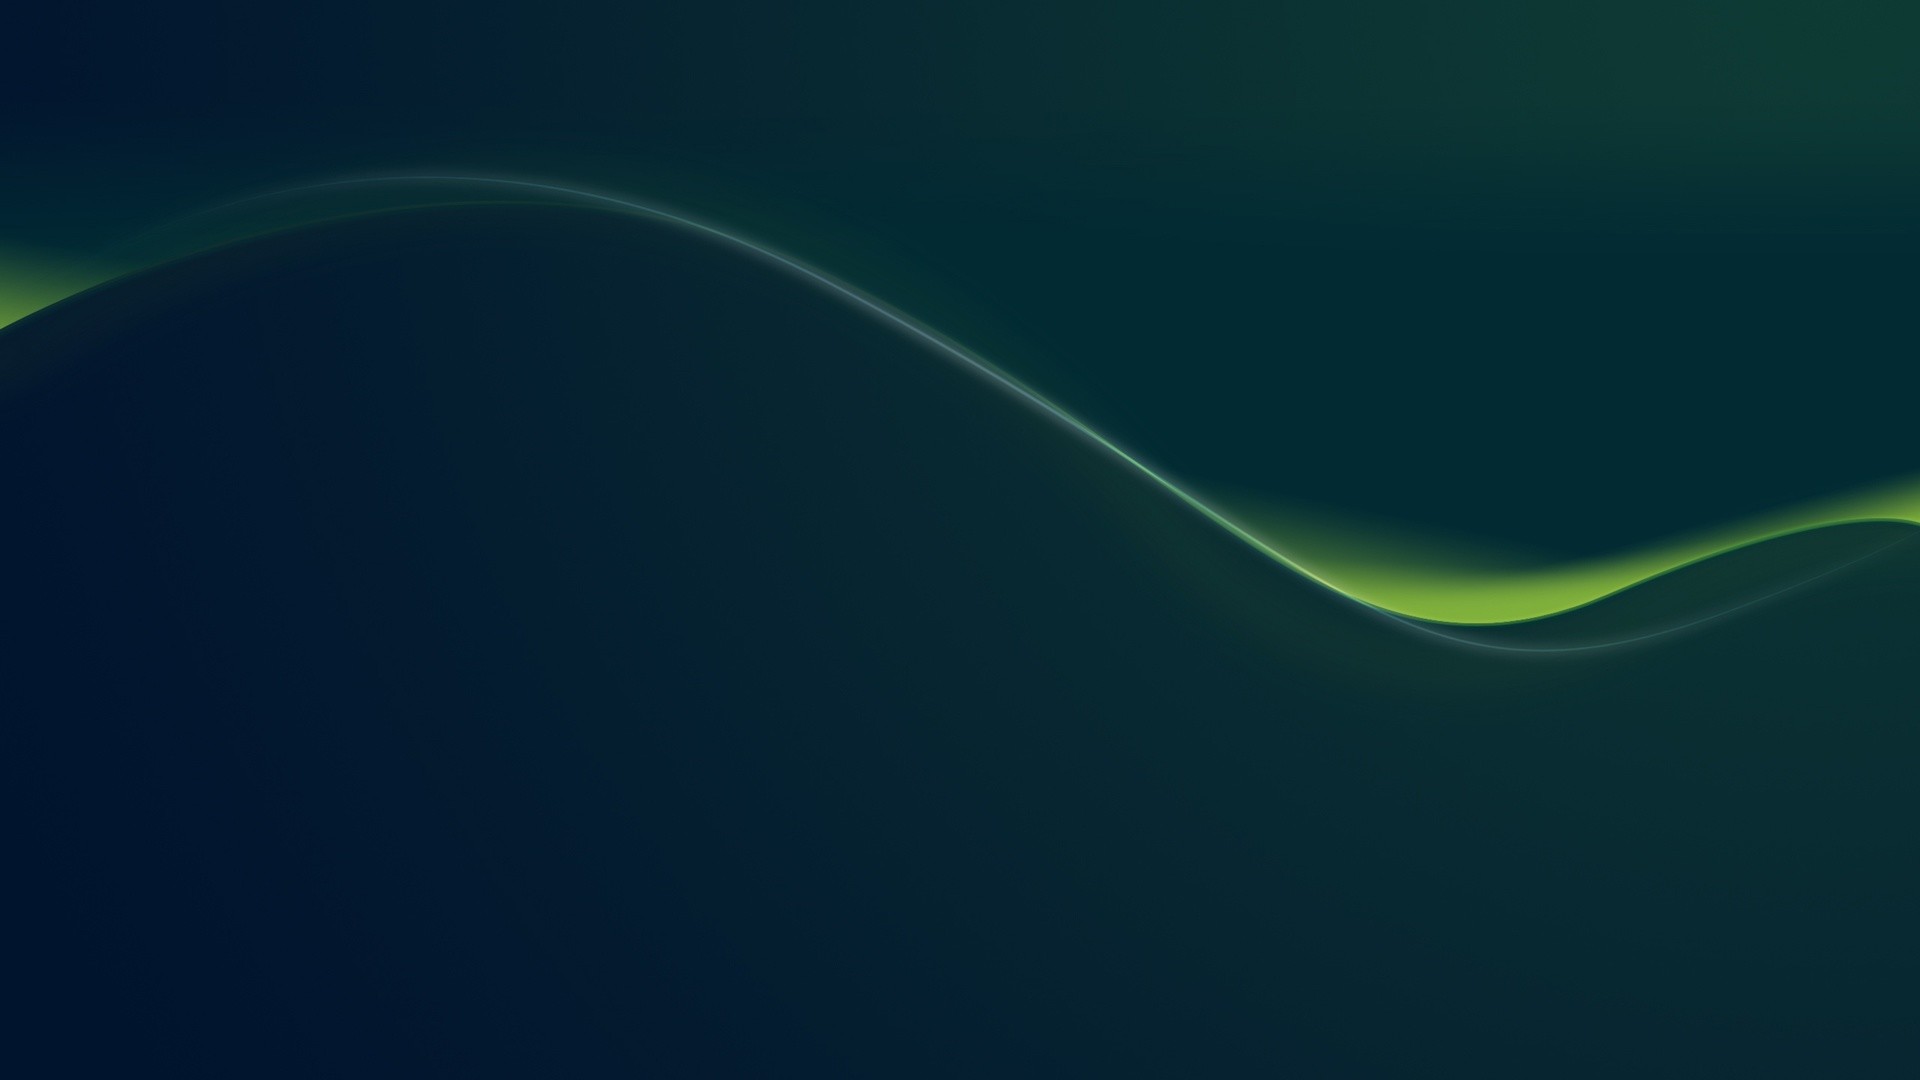 1920x1080  Green Flow. How to set wallpaper on your desktop? Click the  download link from above and set the wallpaper on the desktop from your OS.